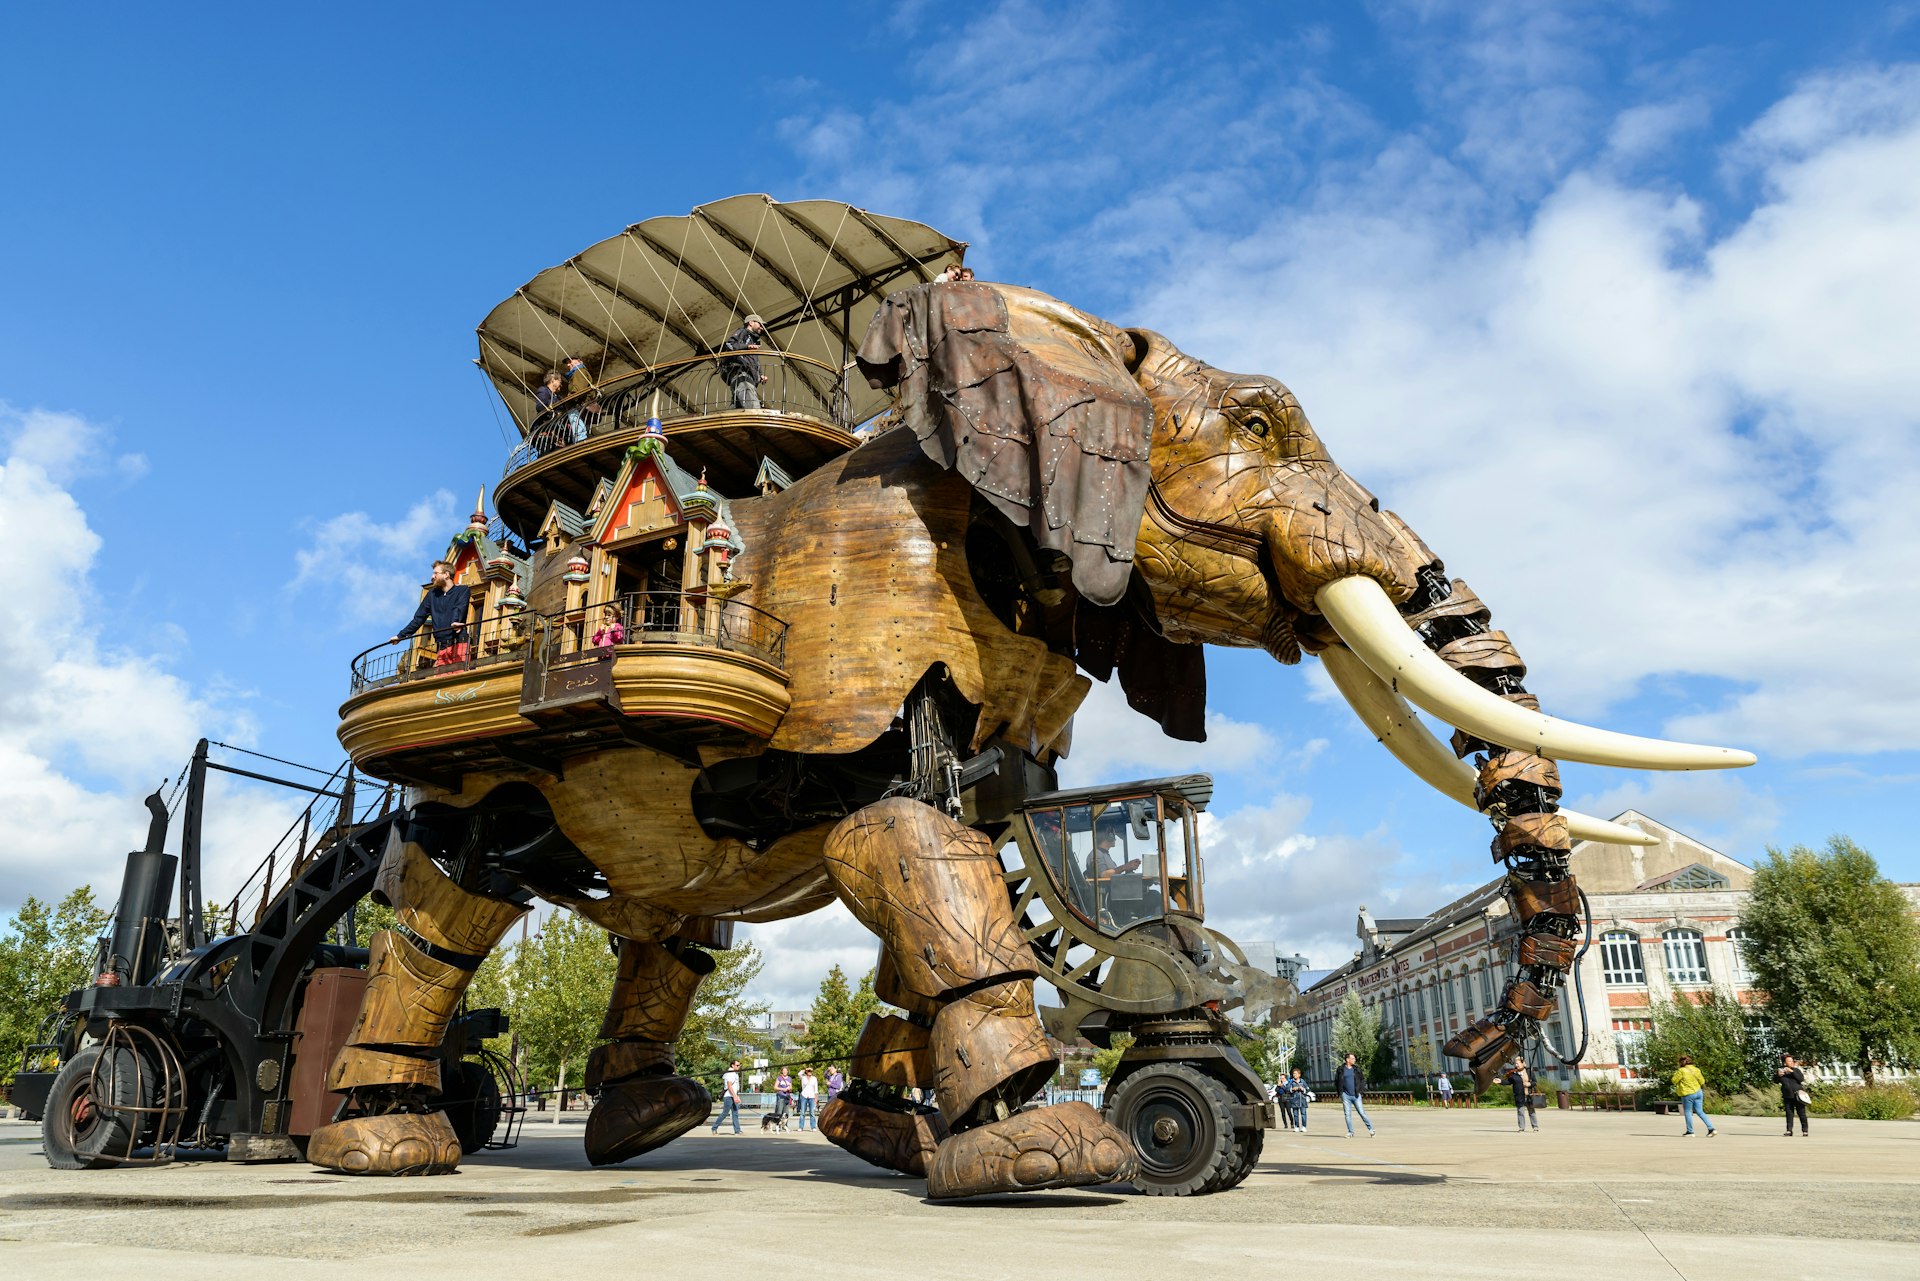 The Great Elephant with passengers aboard, one of the Machines of the Isle of Nantes.